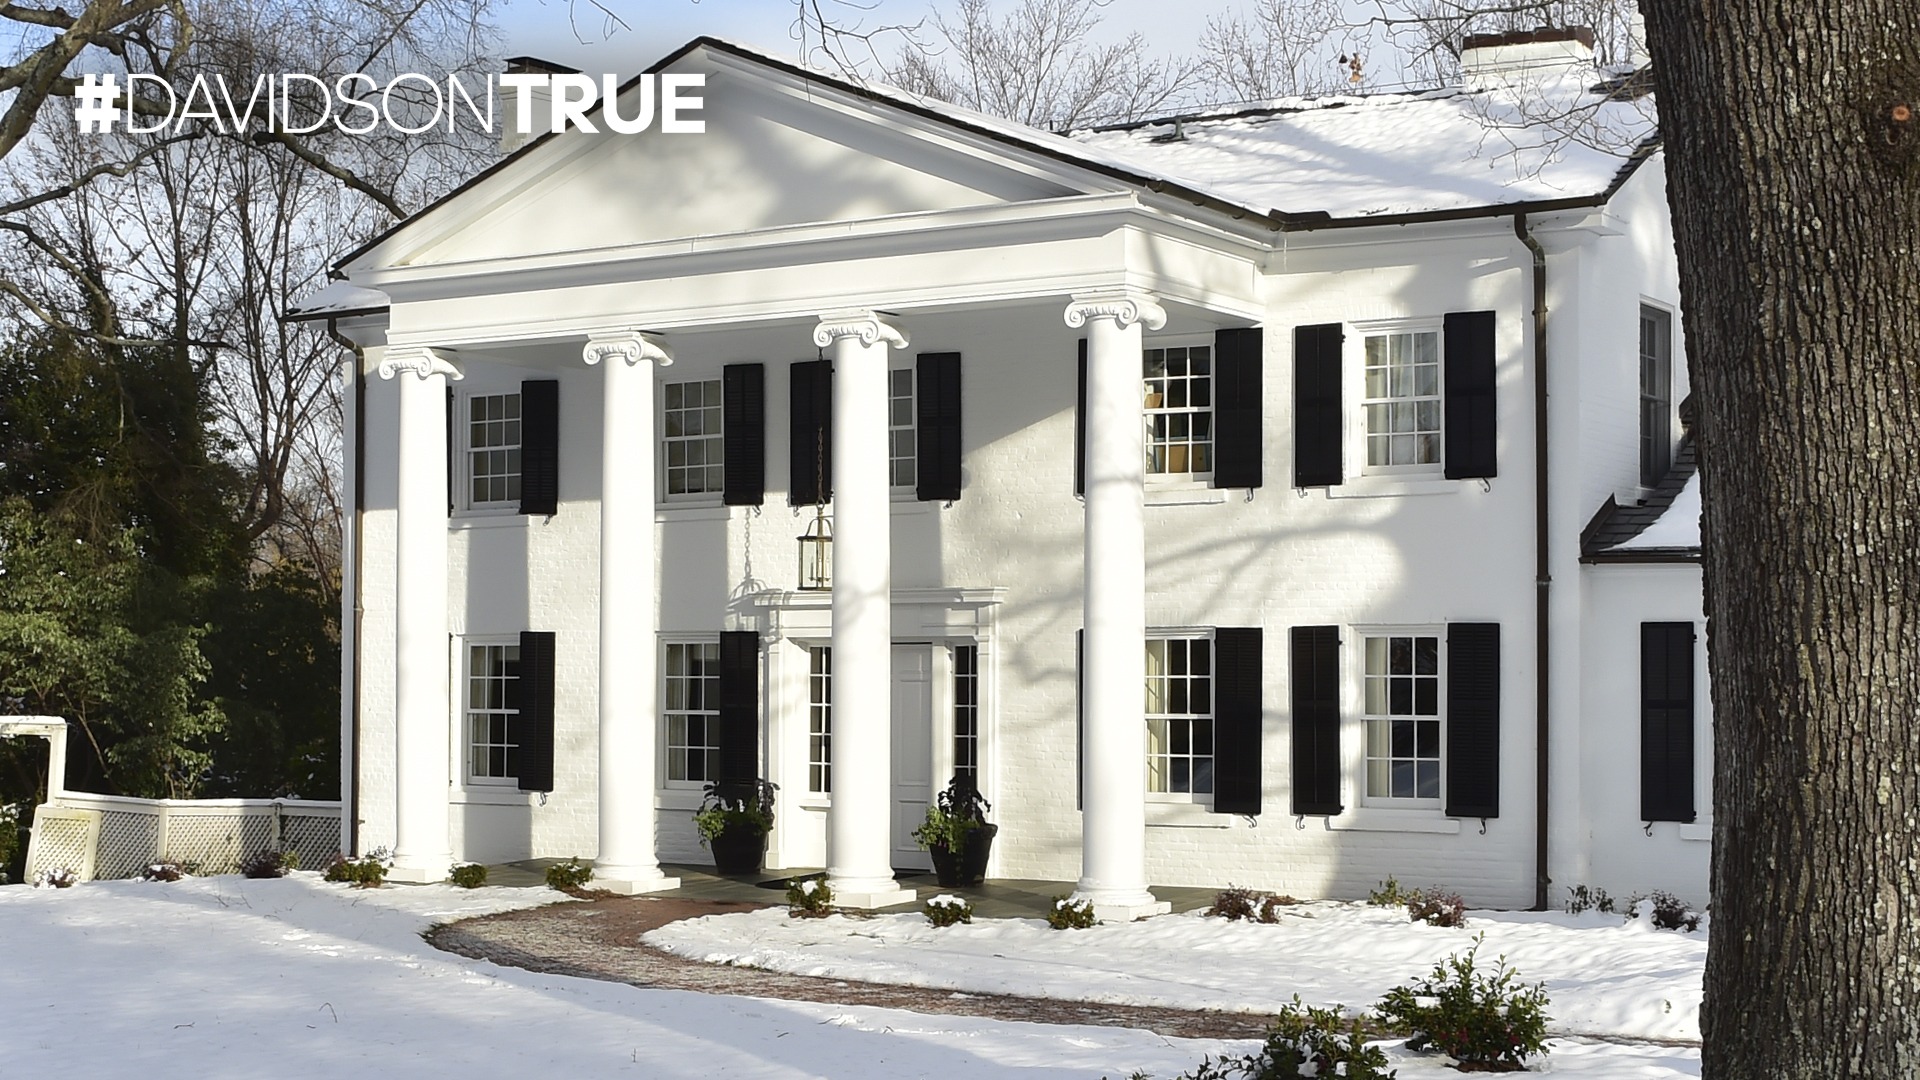 President's House during snow and Davidson True Wordmark